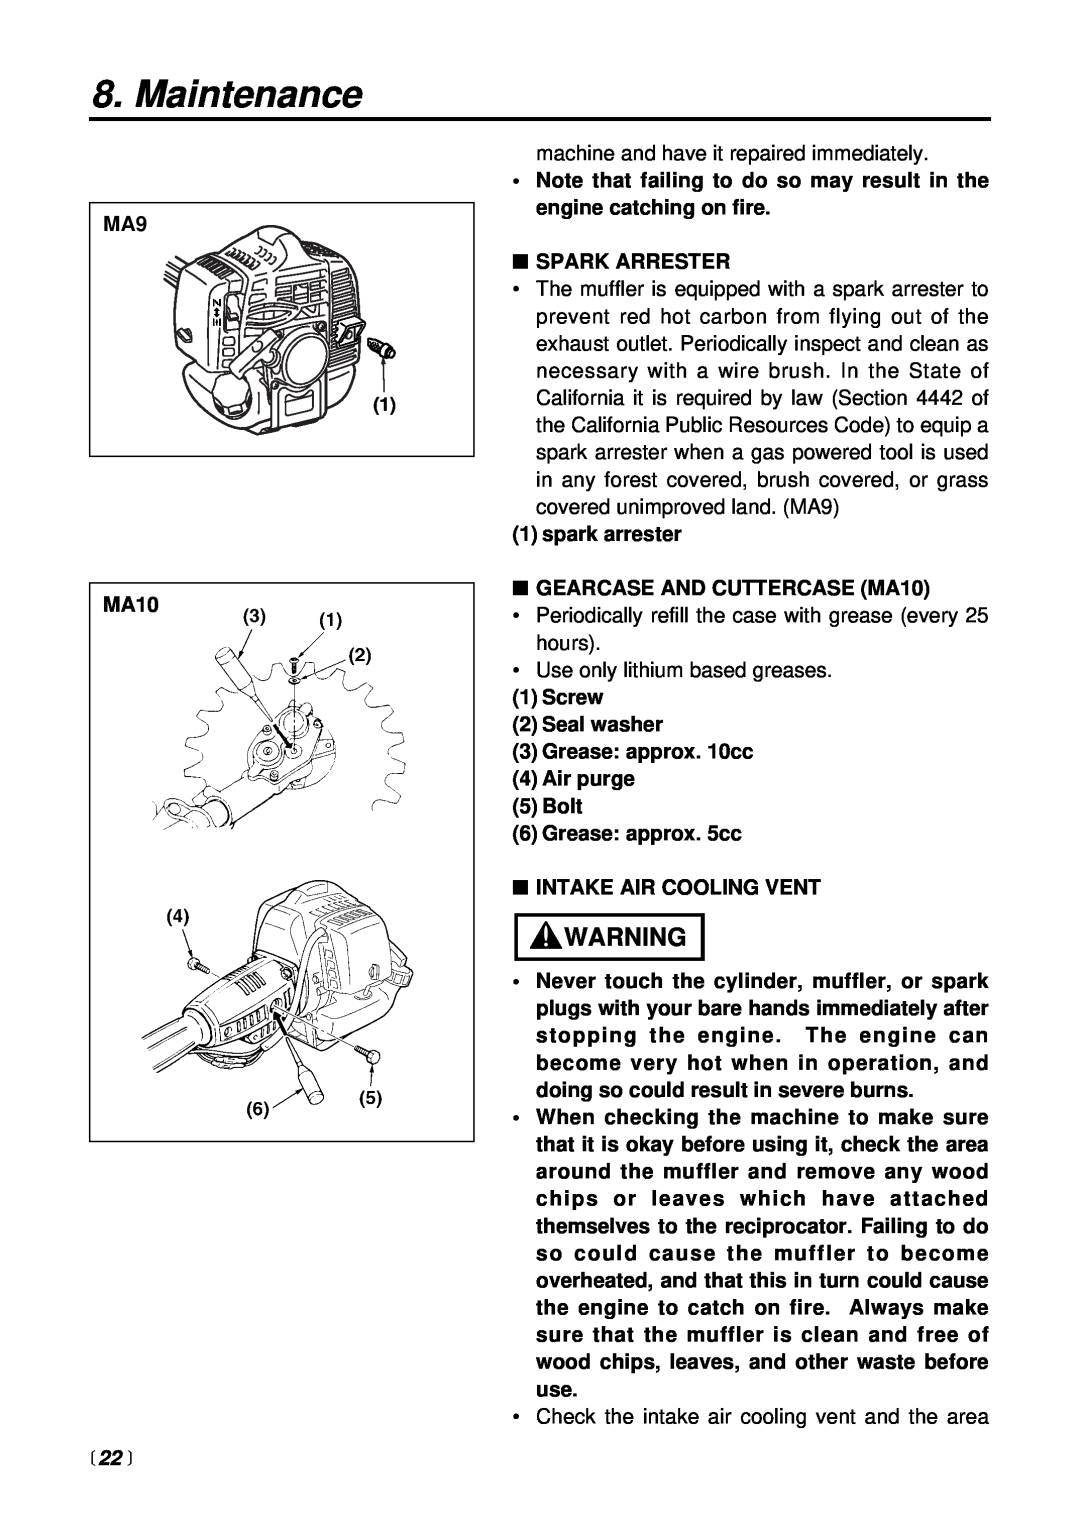 RedMax SGCZ2500S manual MA10,  22 , Note that failing to do so may result in the engine catching on fire, Spark Arrester 